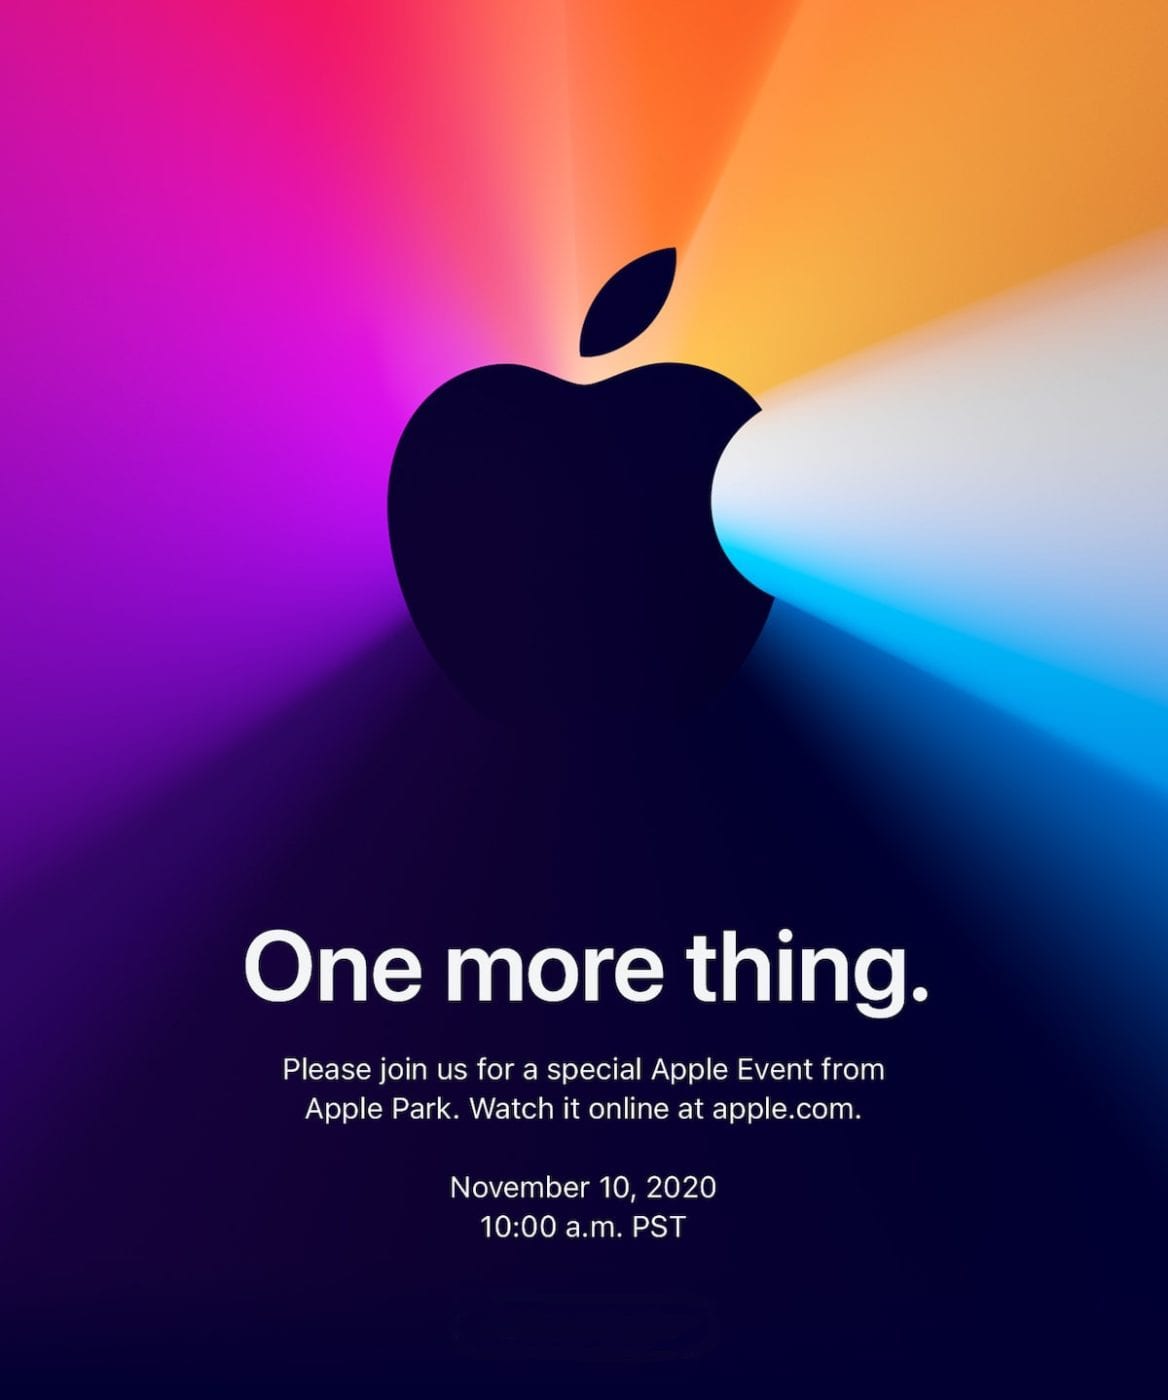 The announcement for the November 10, 2020 "One more thing" Apple event